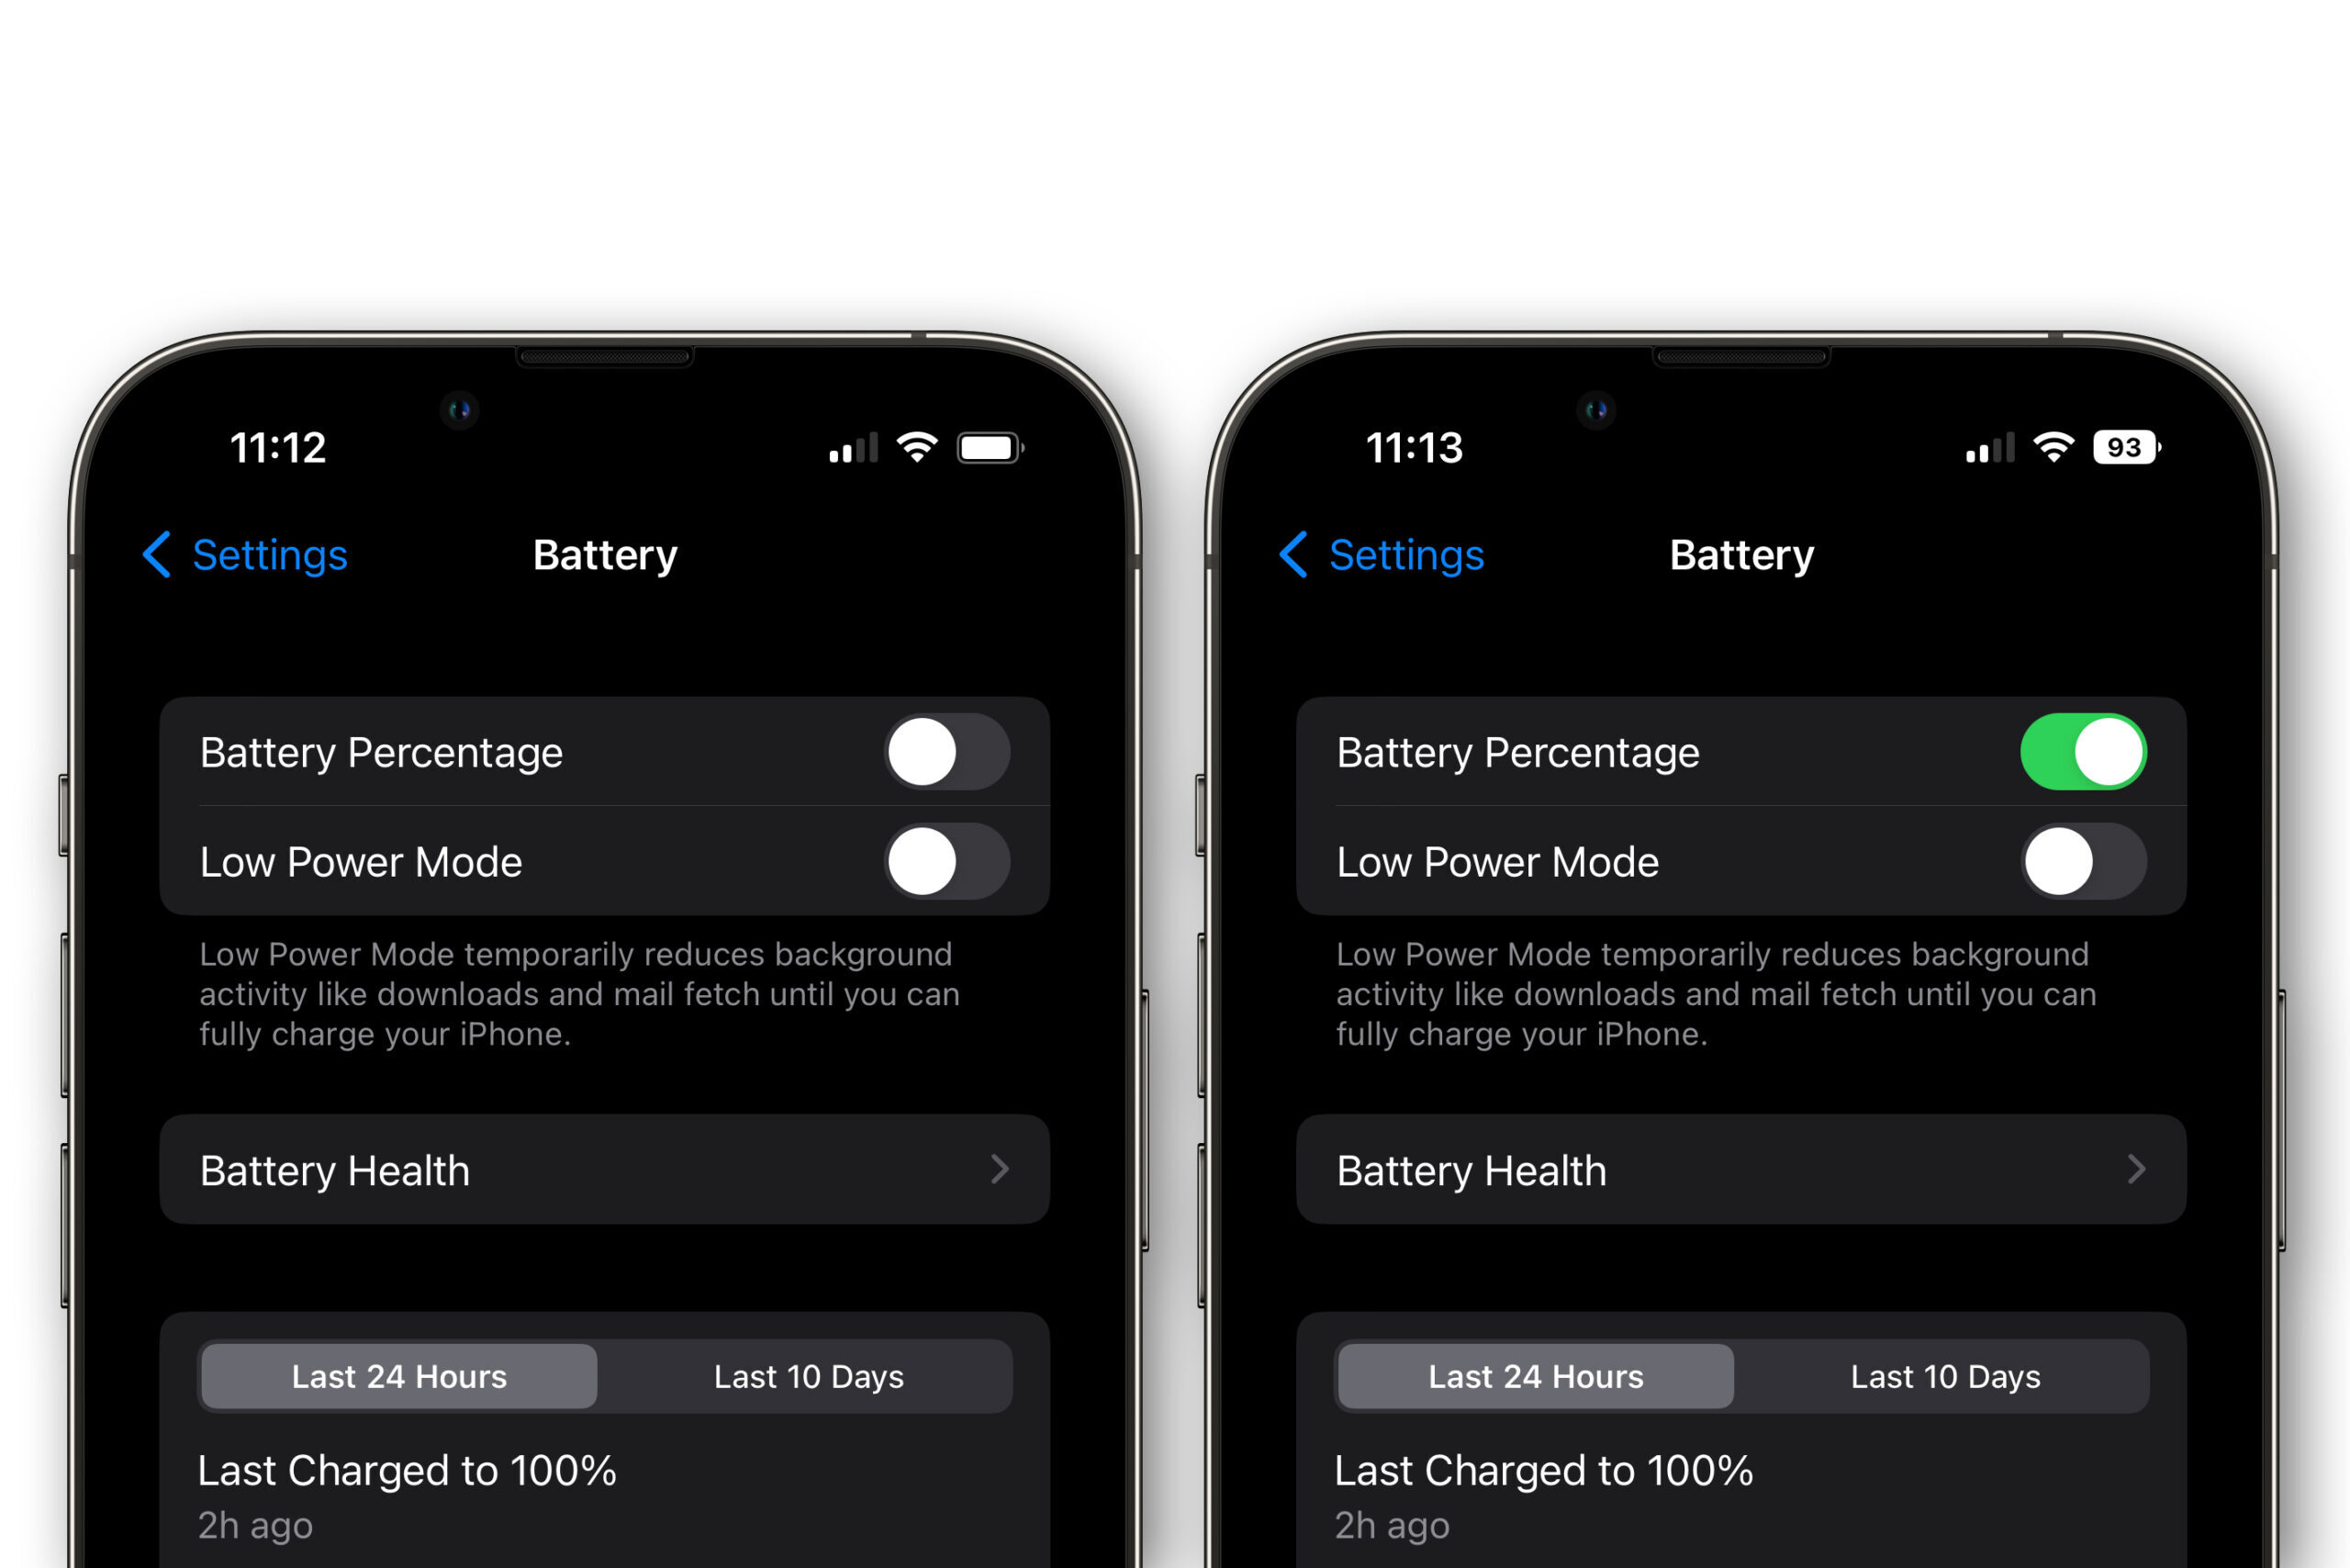 ios16-battery-status-side-by-side-9989243